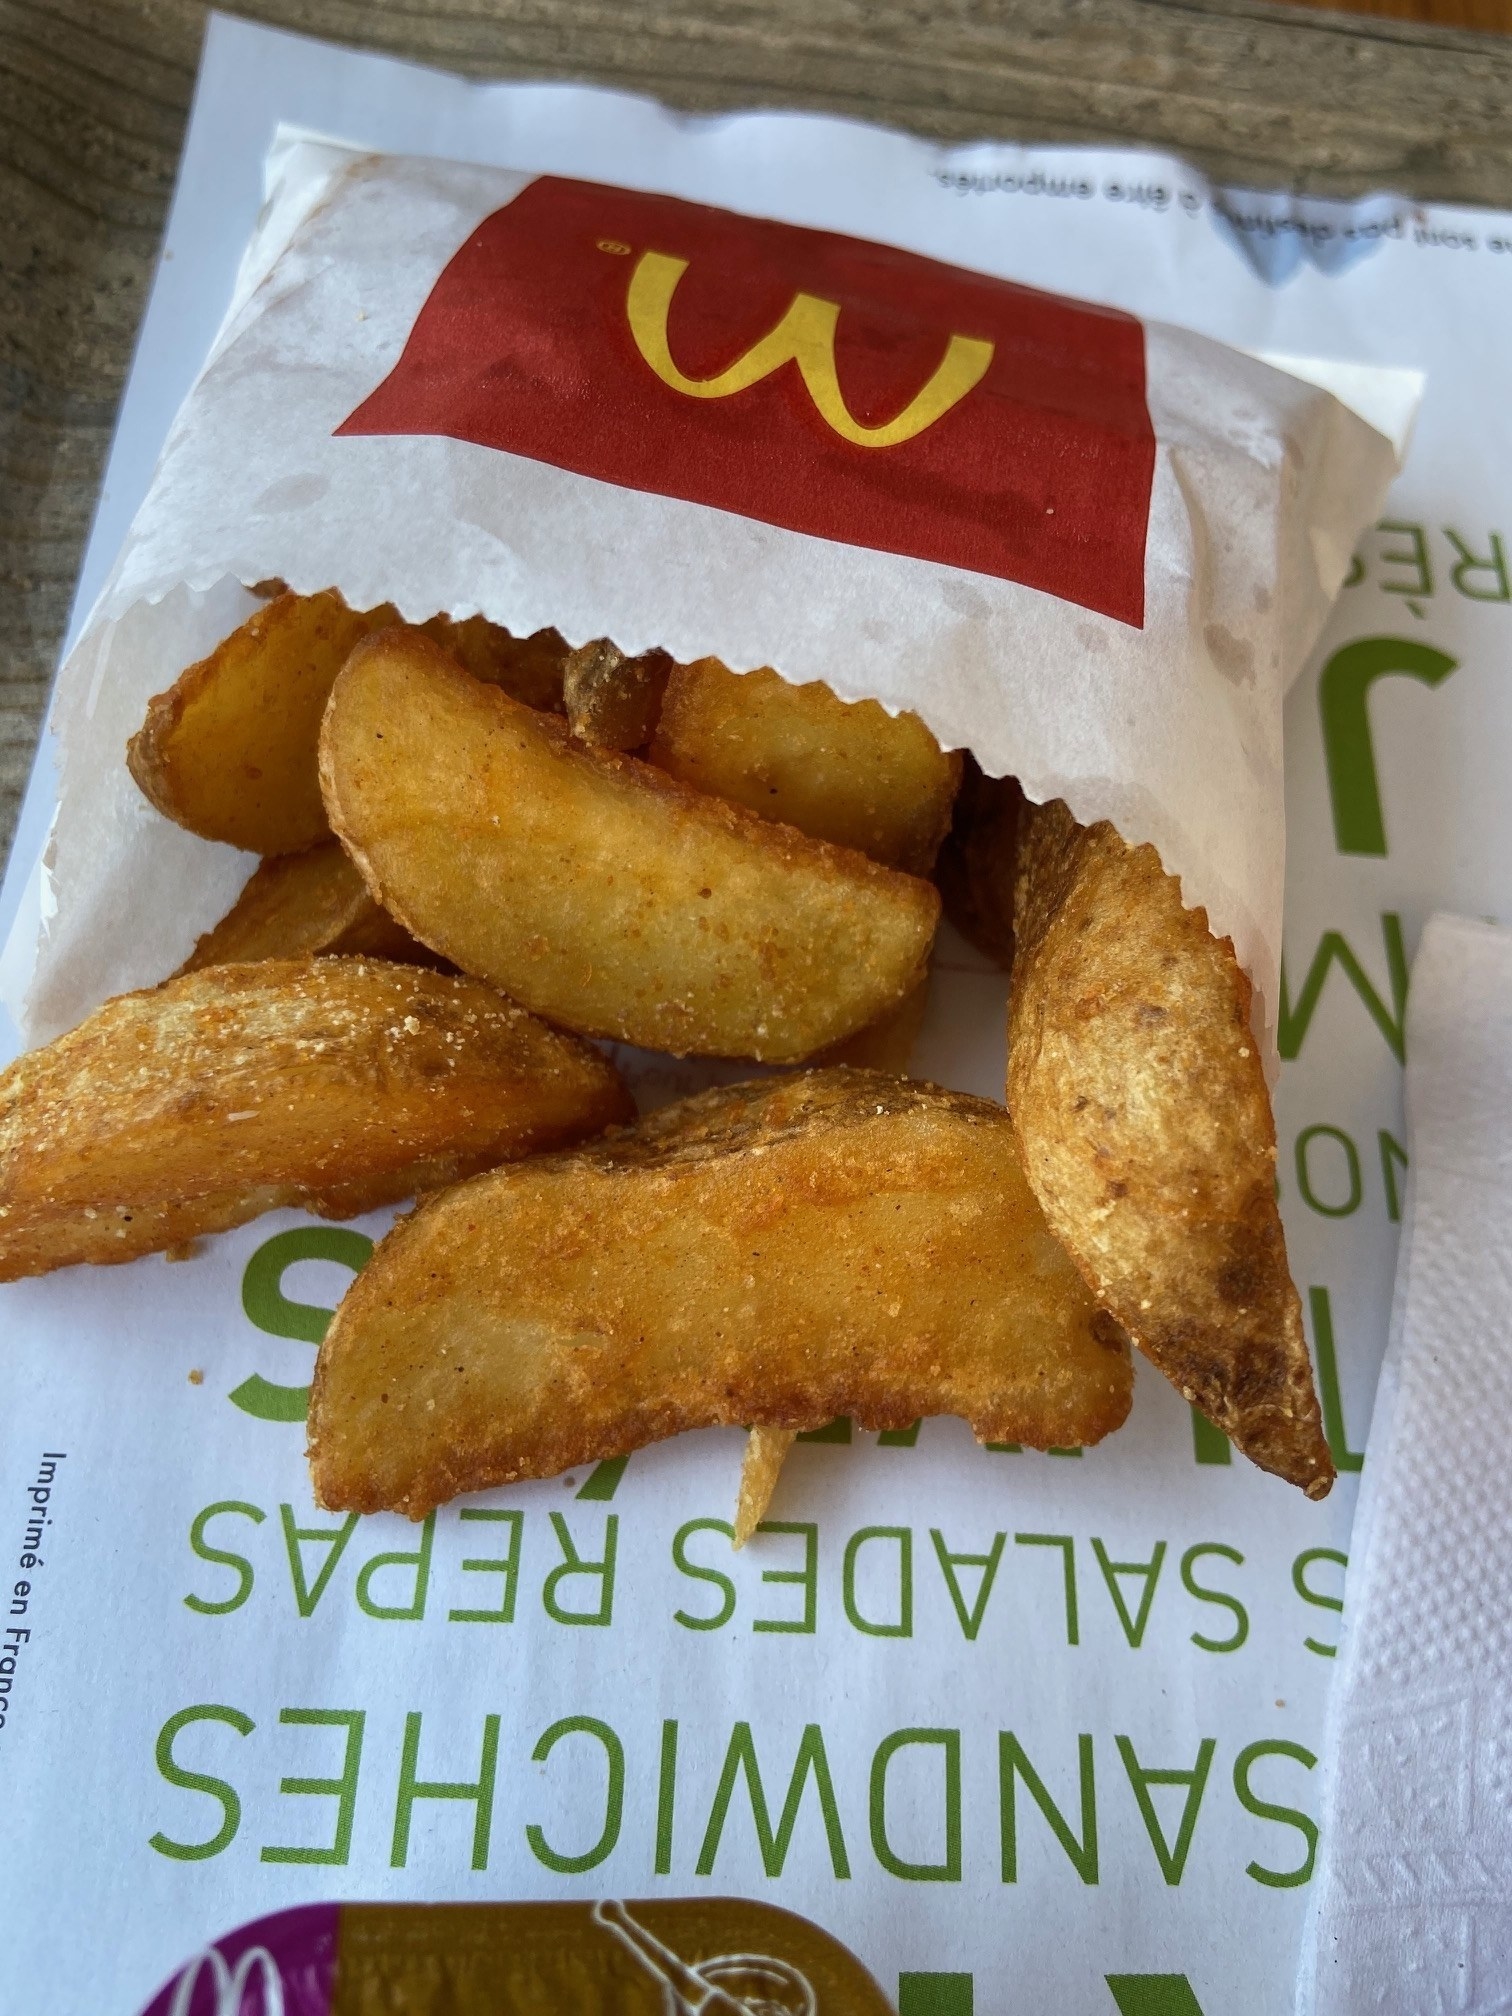 Thick-cut potato wedges from McDonalds France